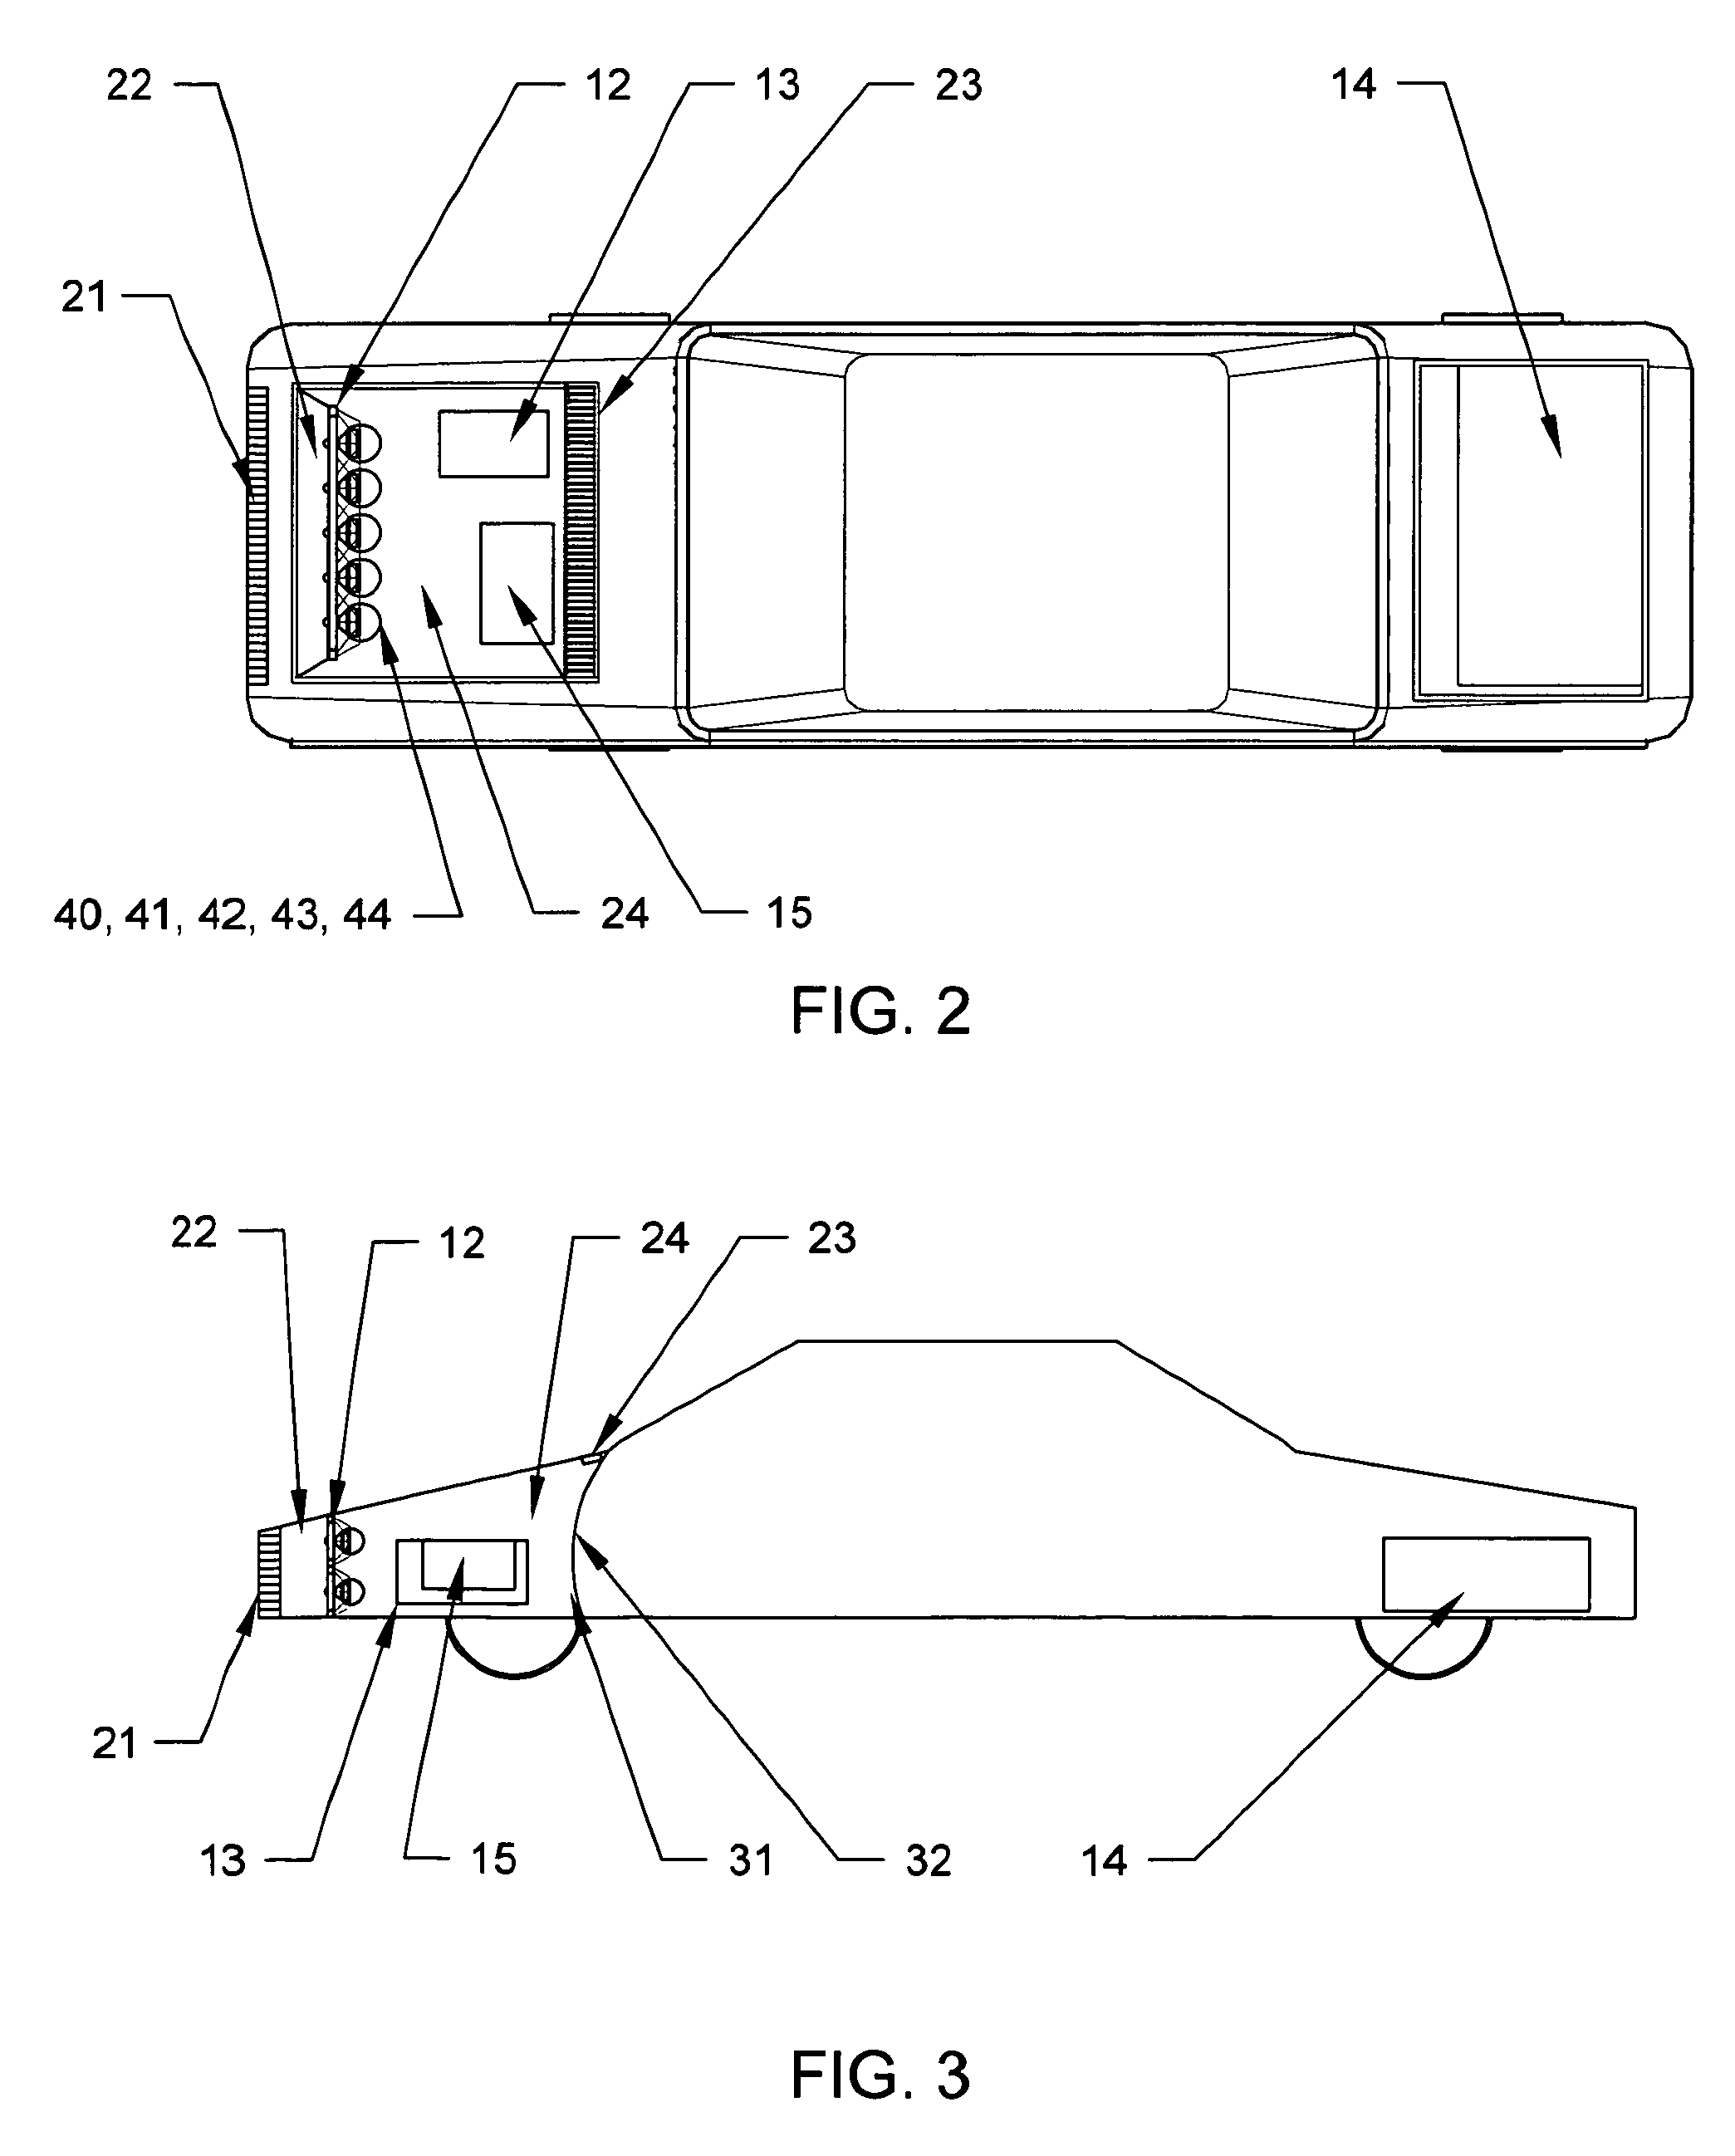 Ram air driven turbine generator battery charging system using control of turbine generator torque to extend the range of an electric vehicle